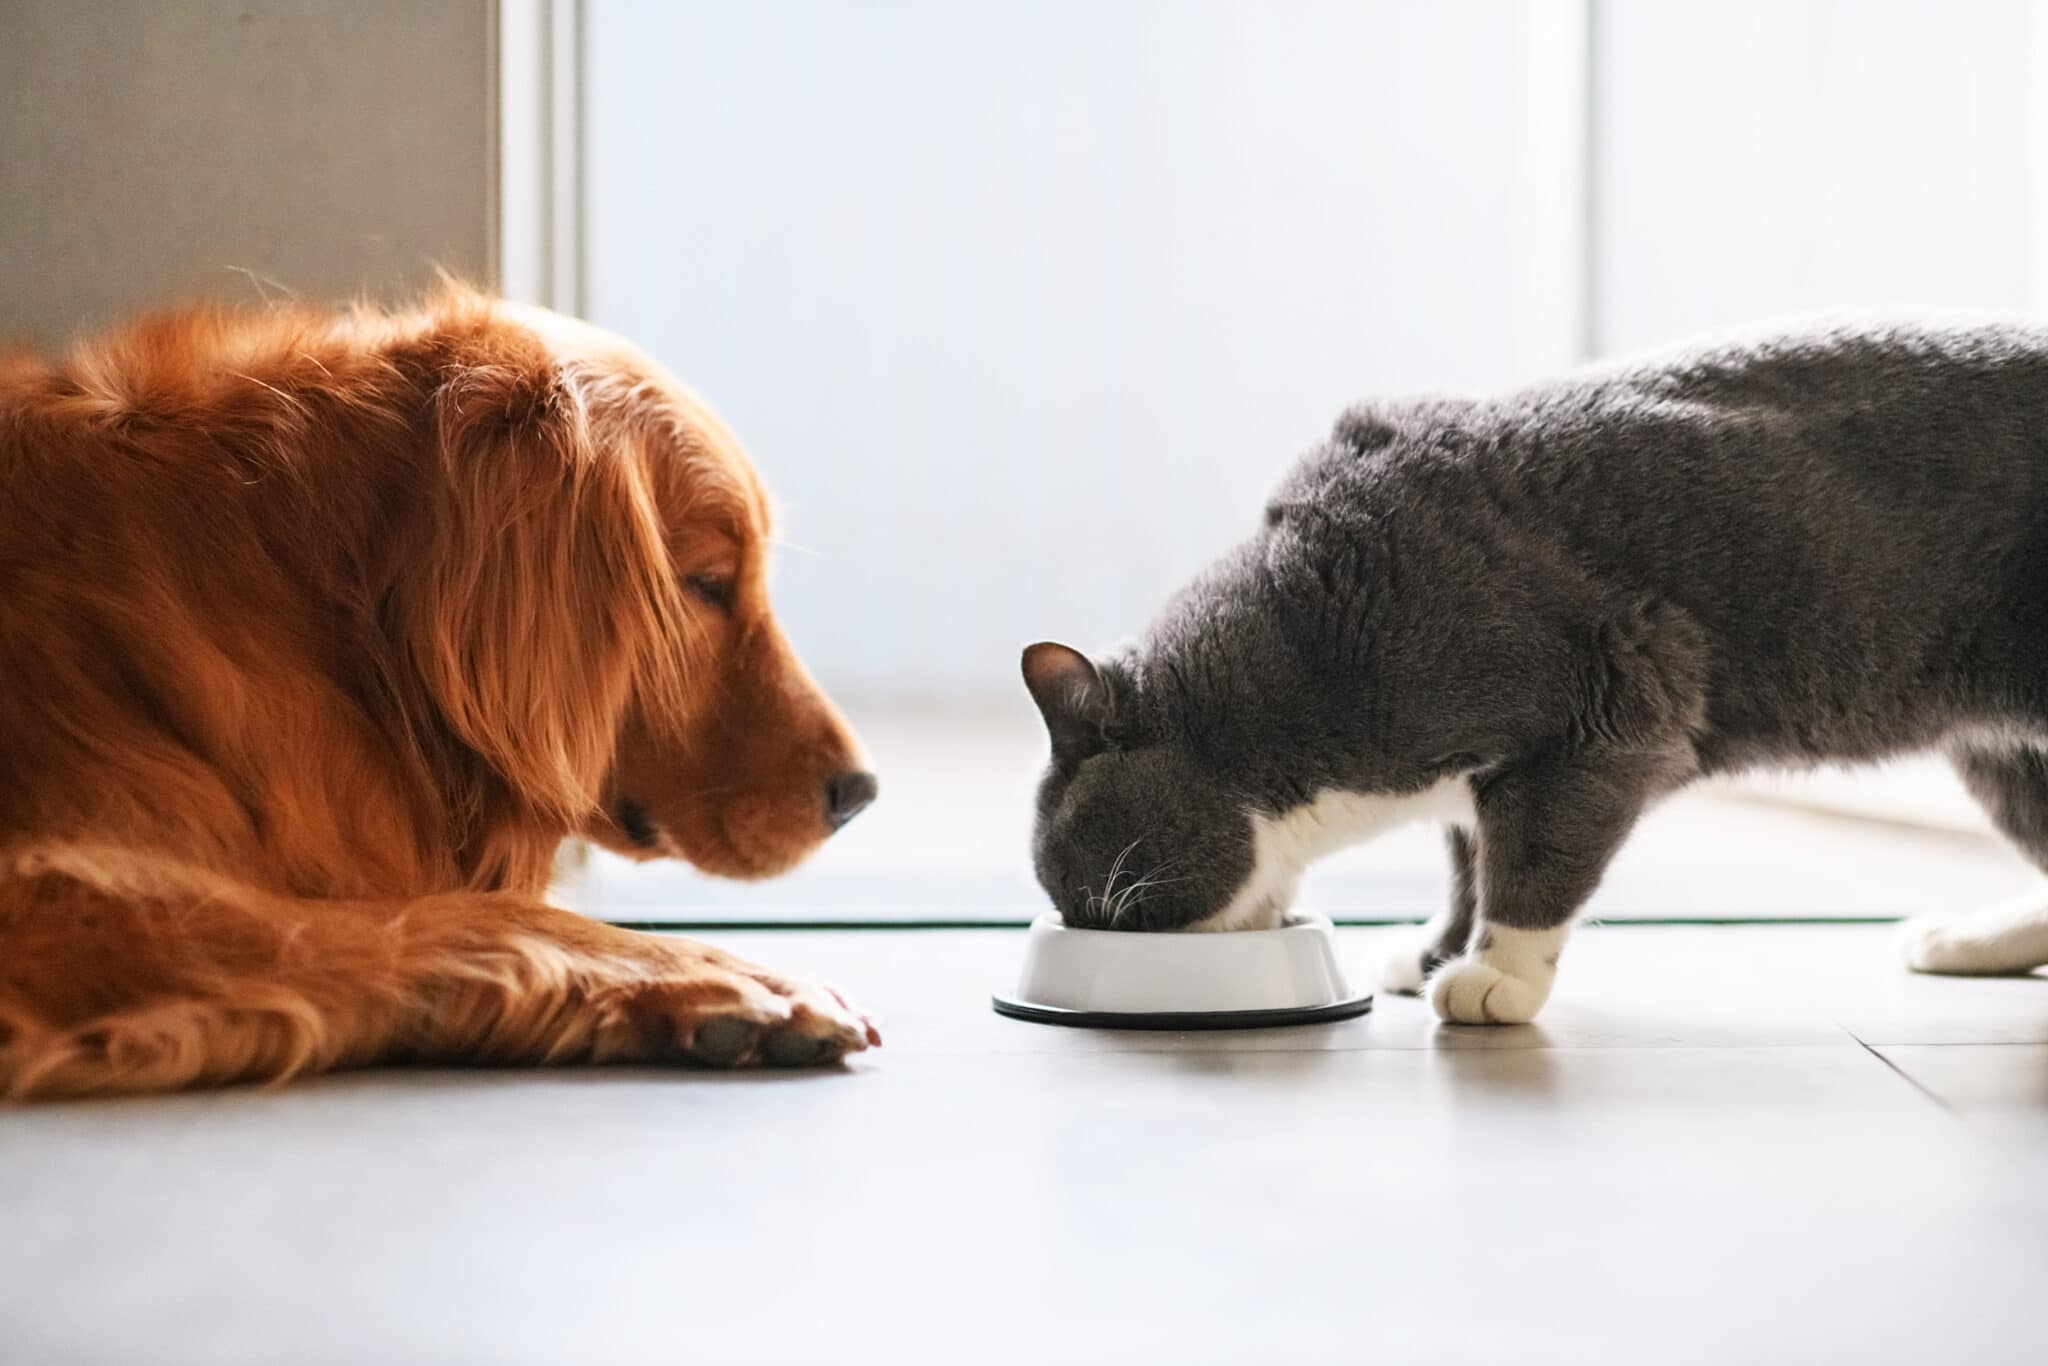 How to take care of your pets if you Adopt a cat or dog?